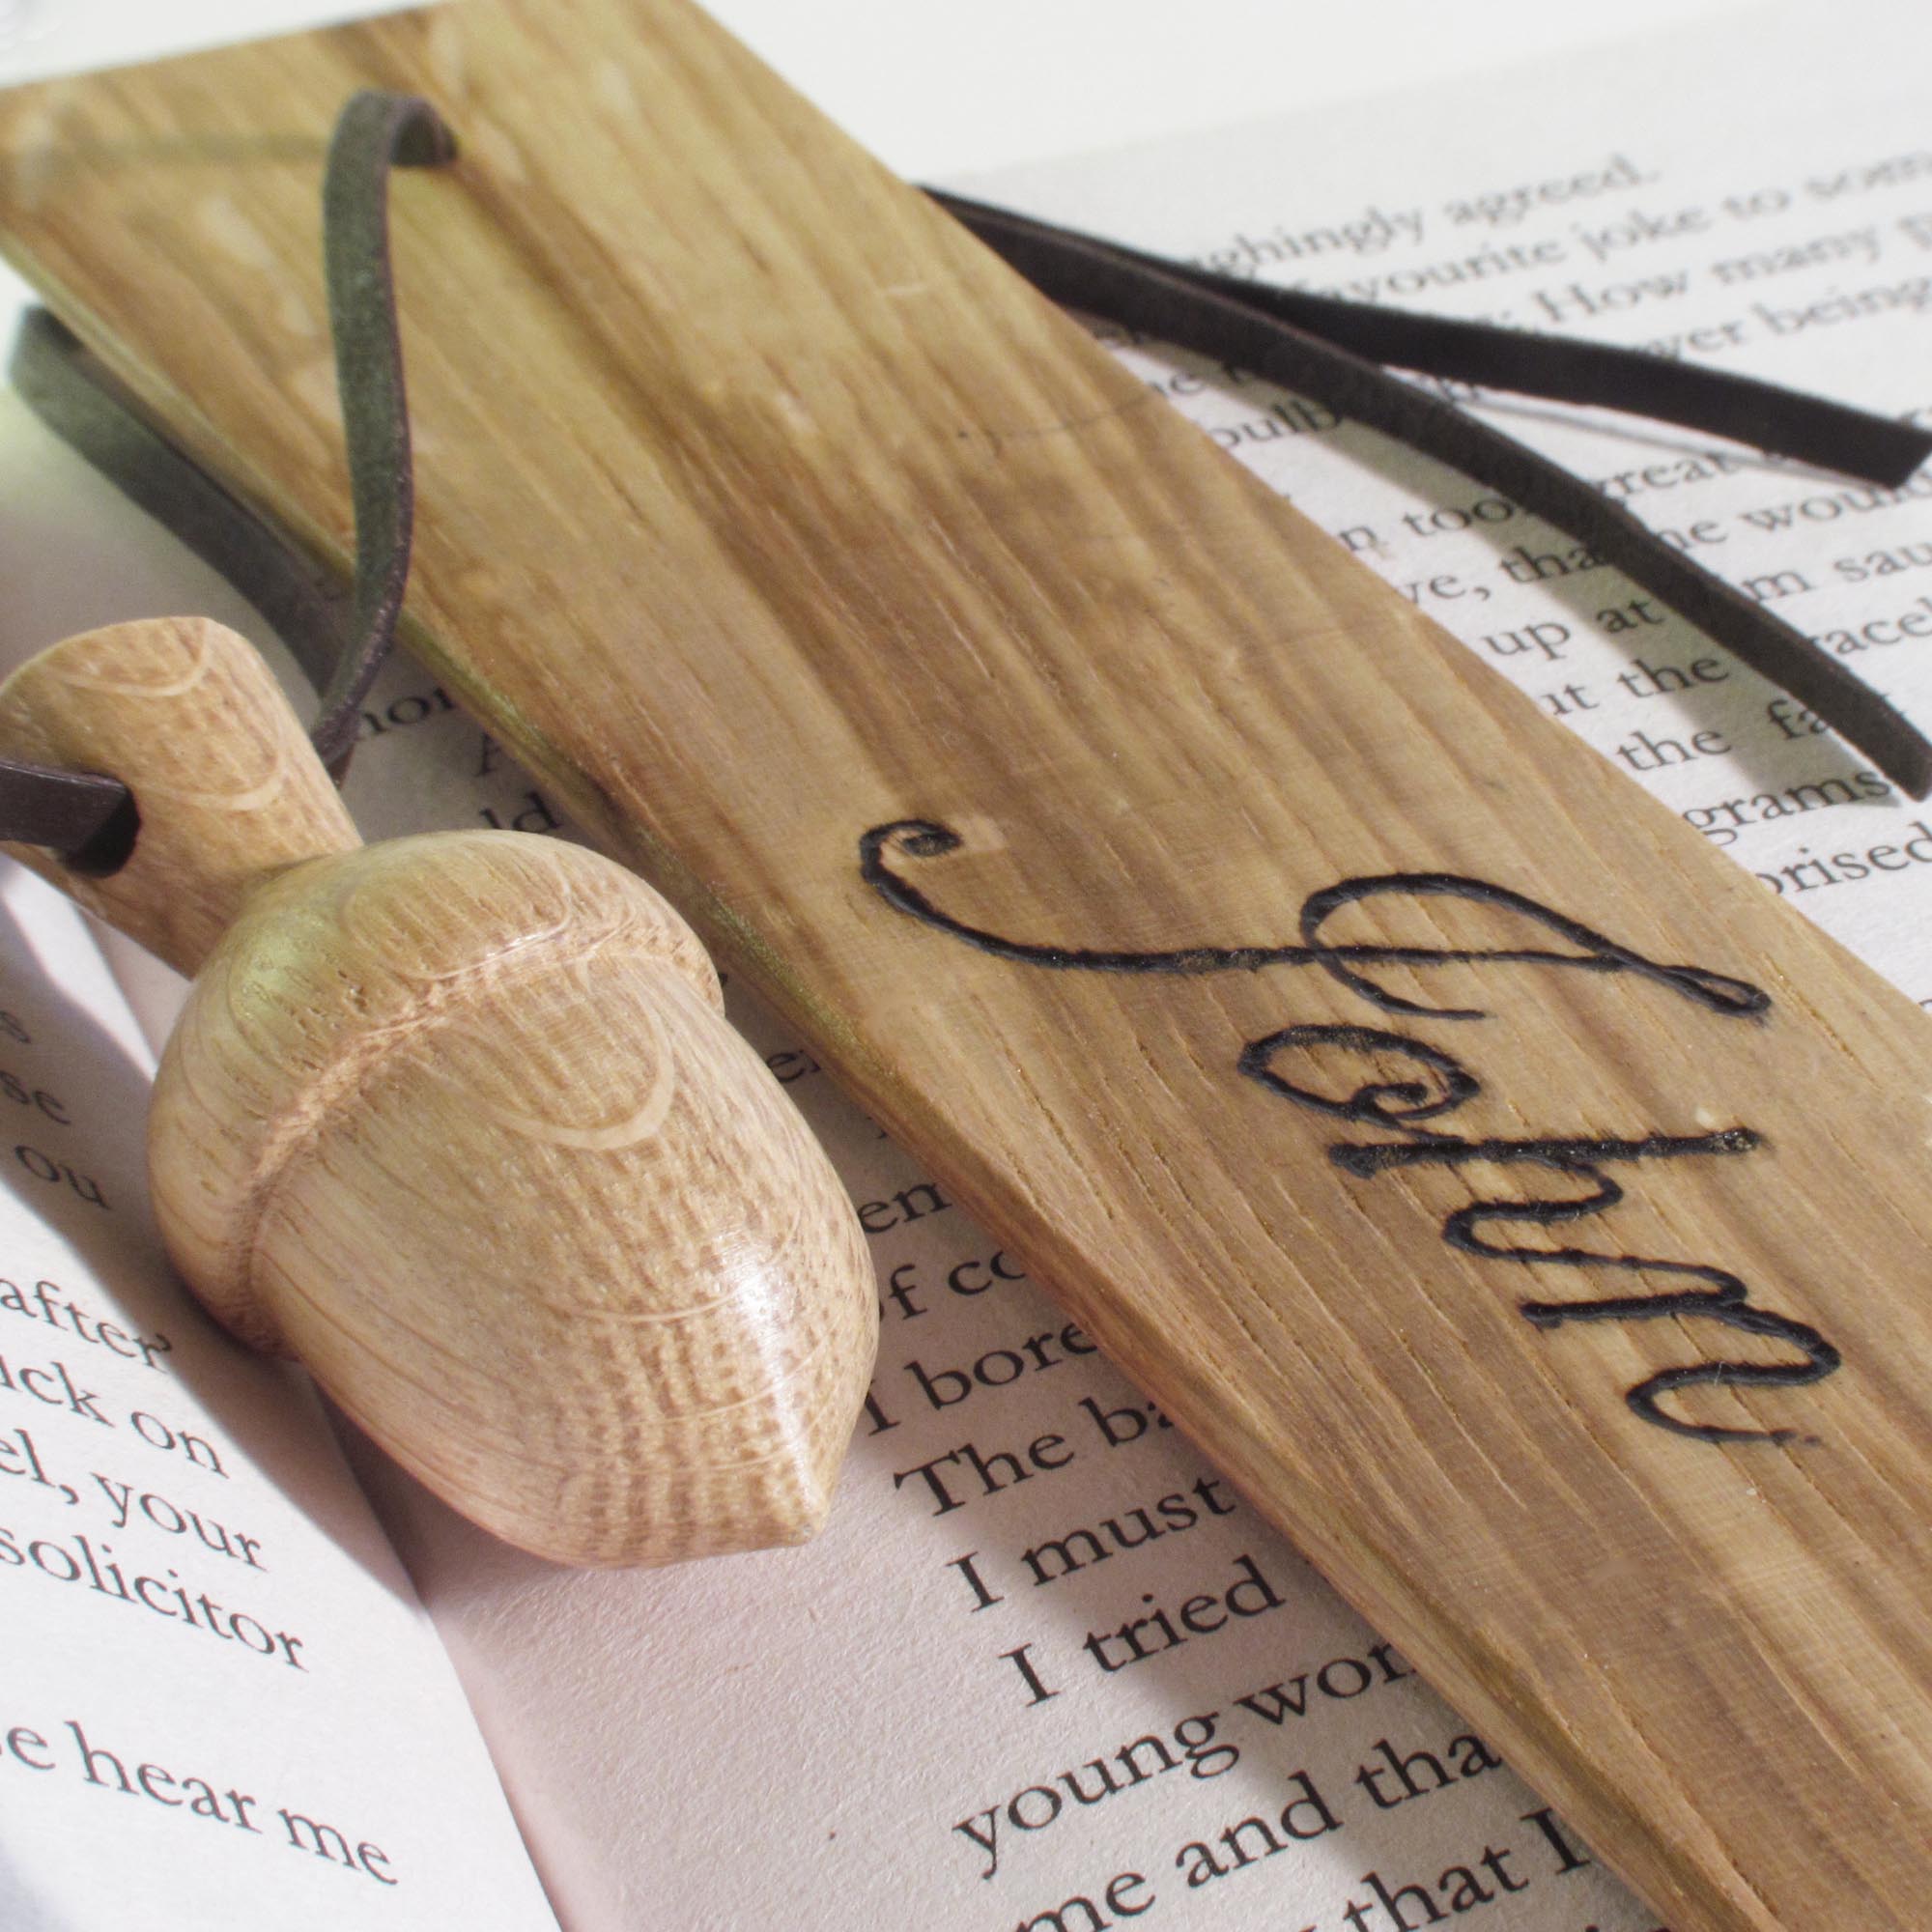 Bookmark made from wood